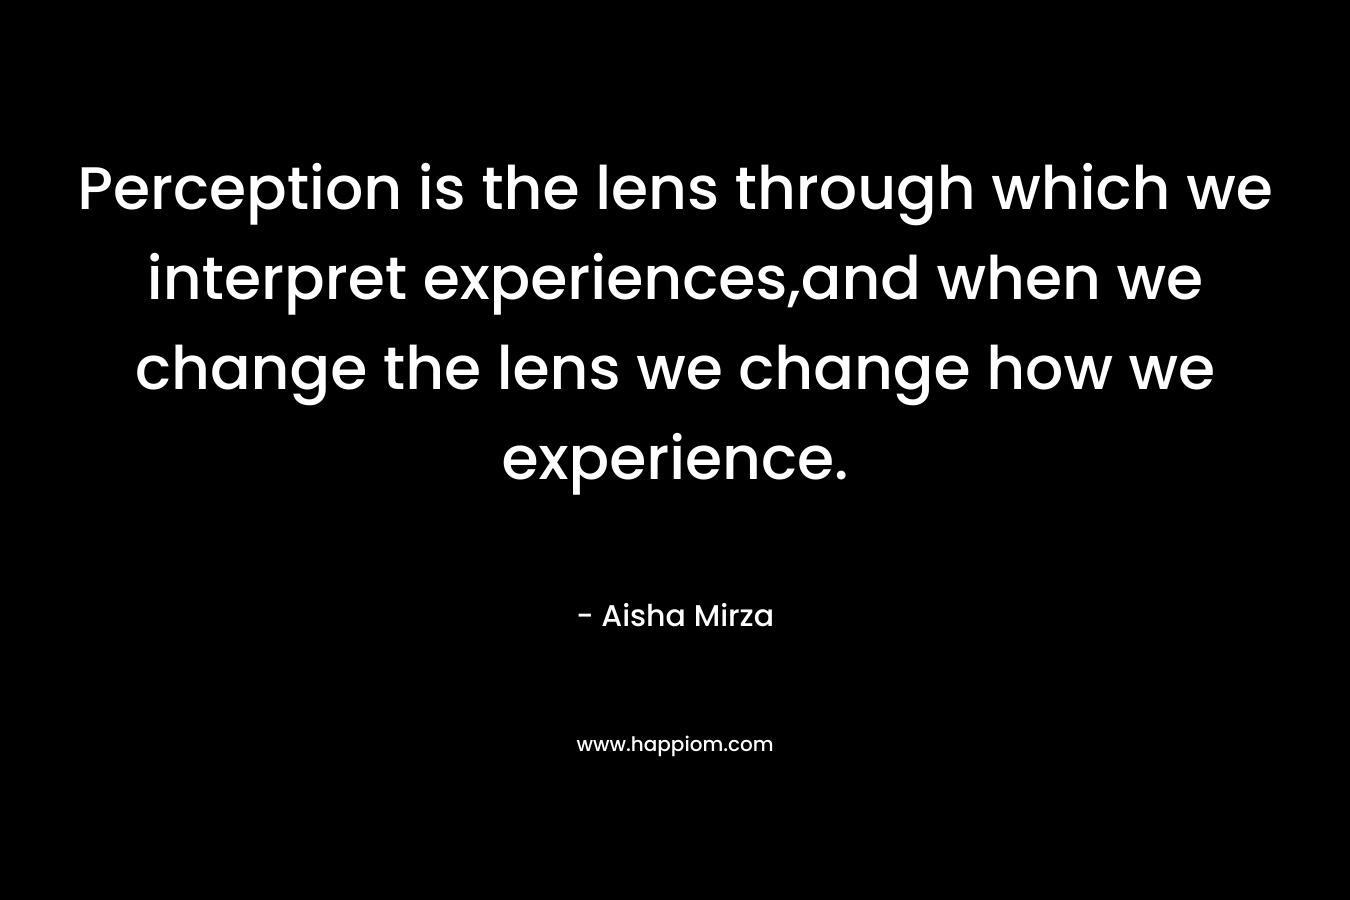 Perception is the lens through which we interpret experiences,and when we change the lens we change how we experience.